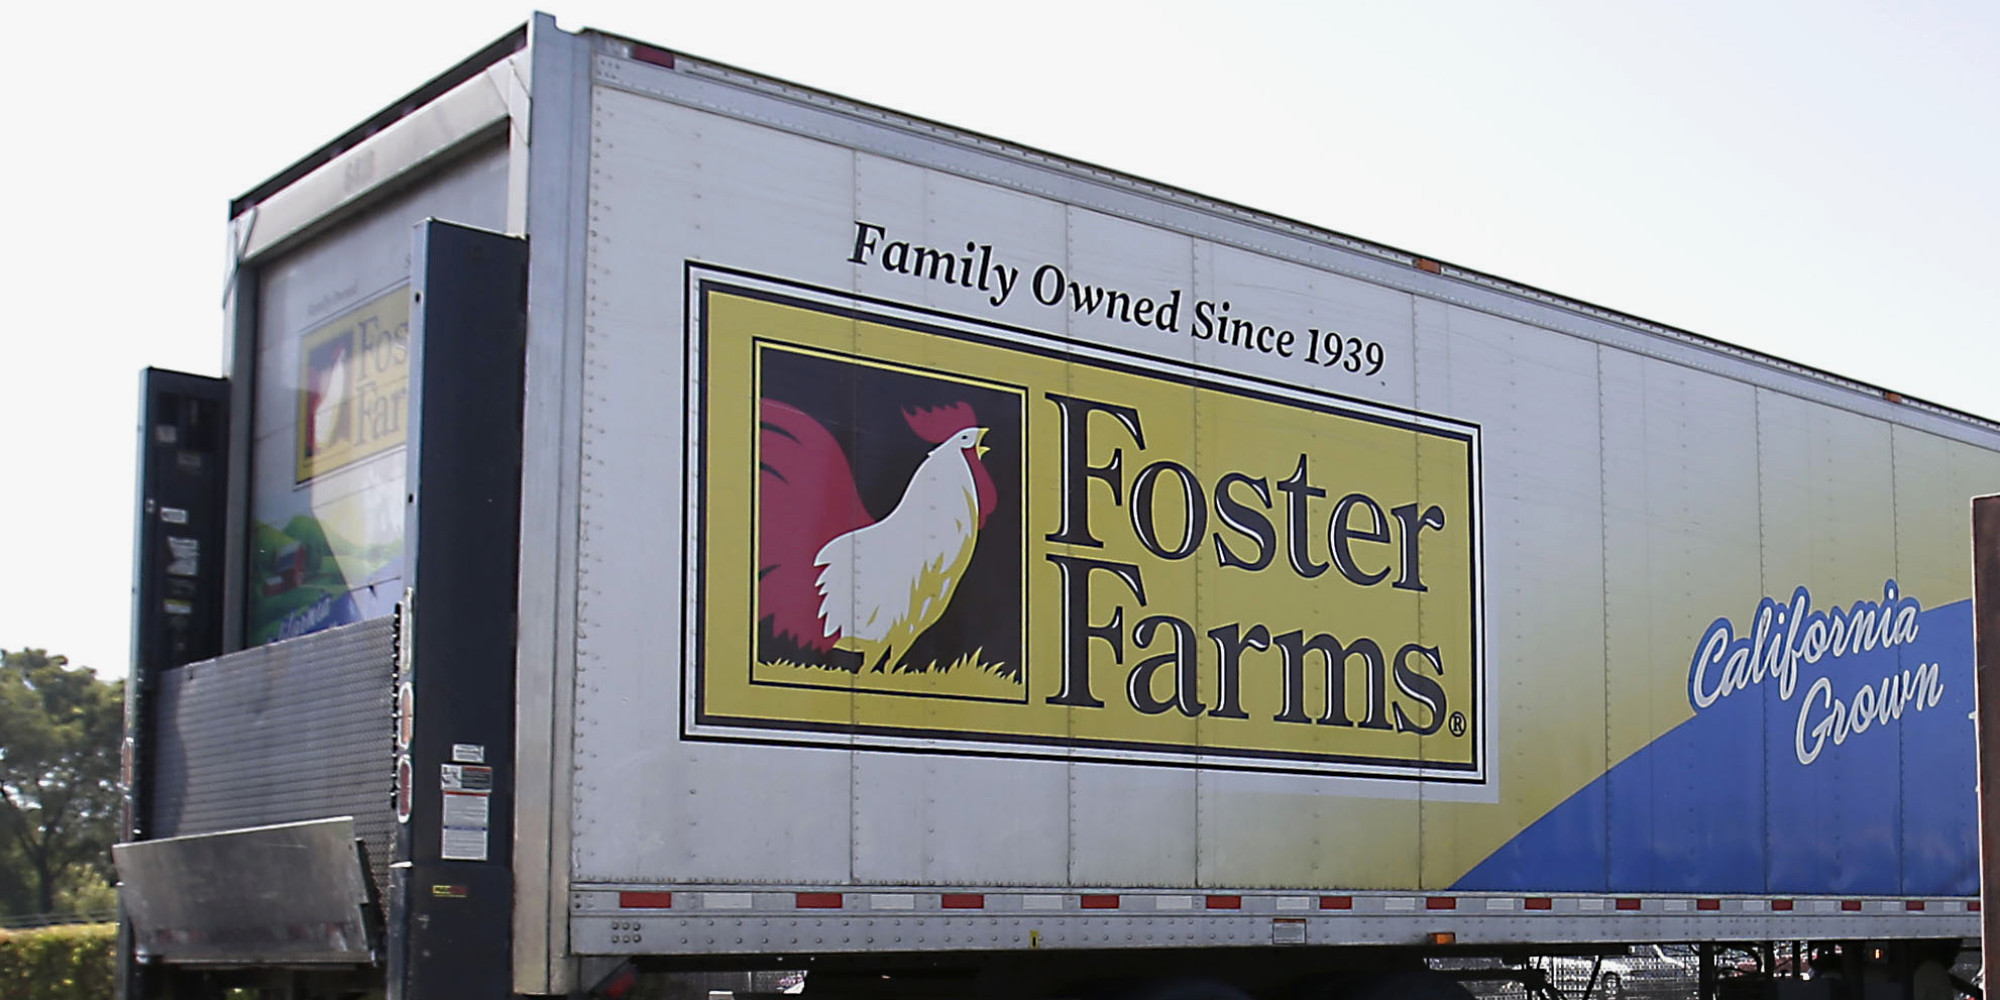 Nearly 40,000 Pounds Of Foster Farms Chicken Recalled Due To Listeria